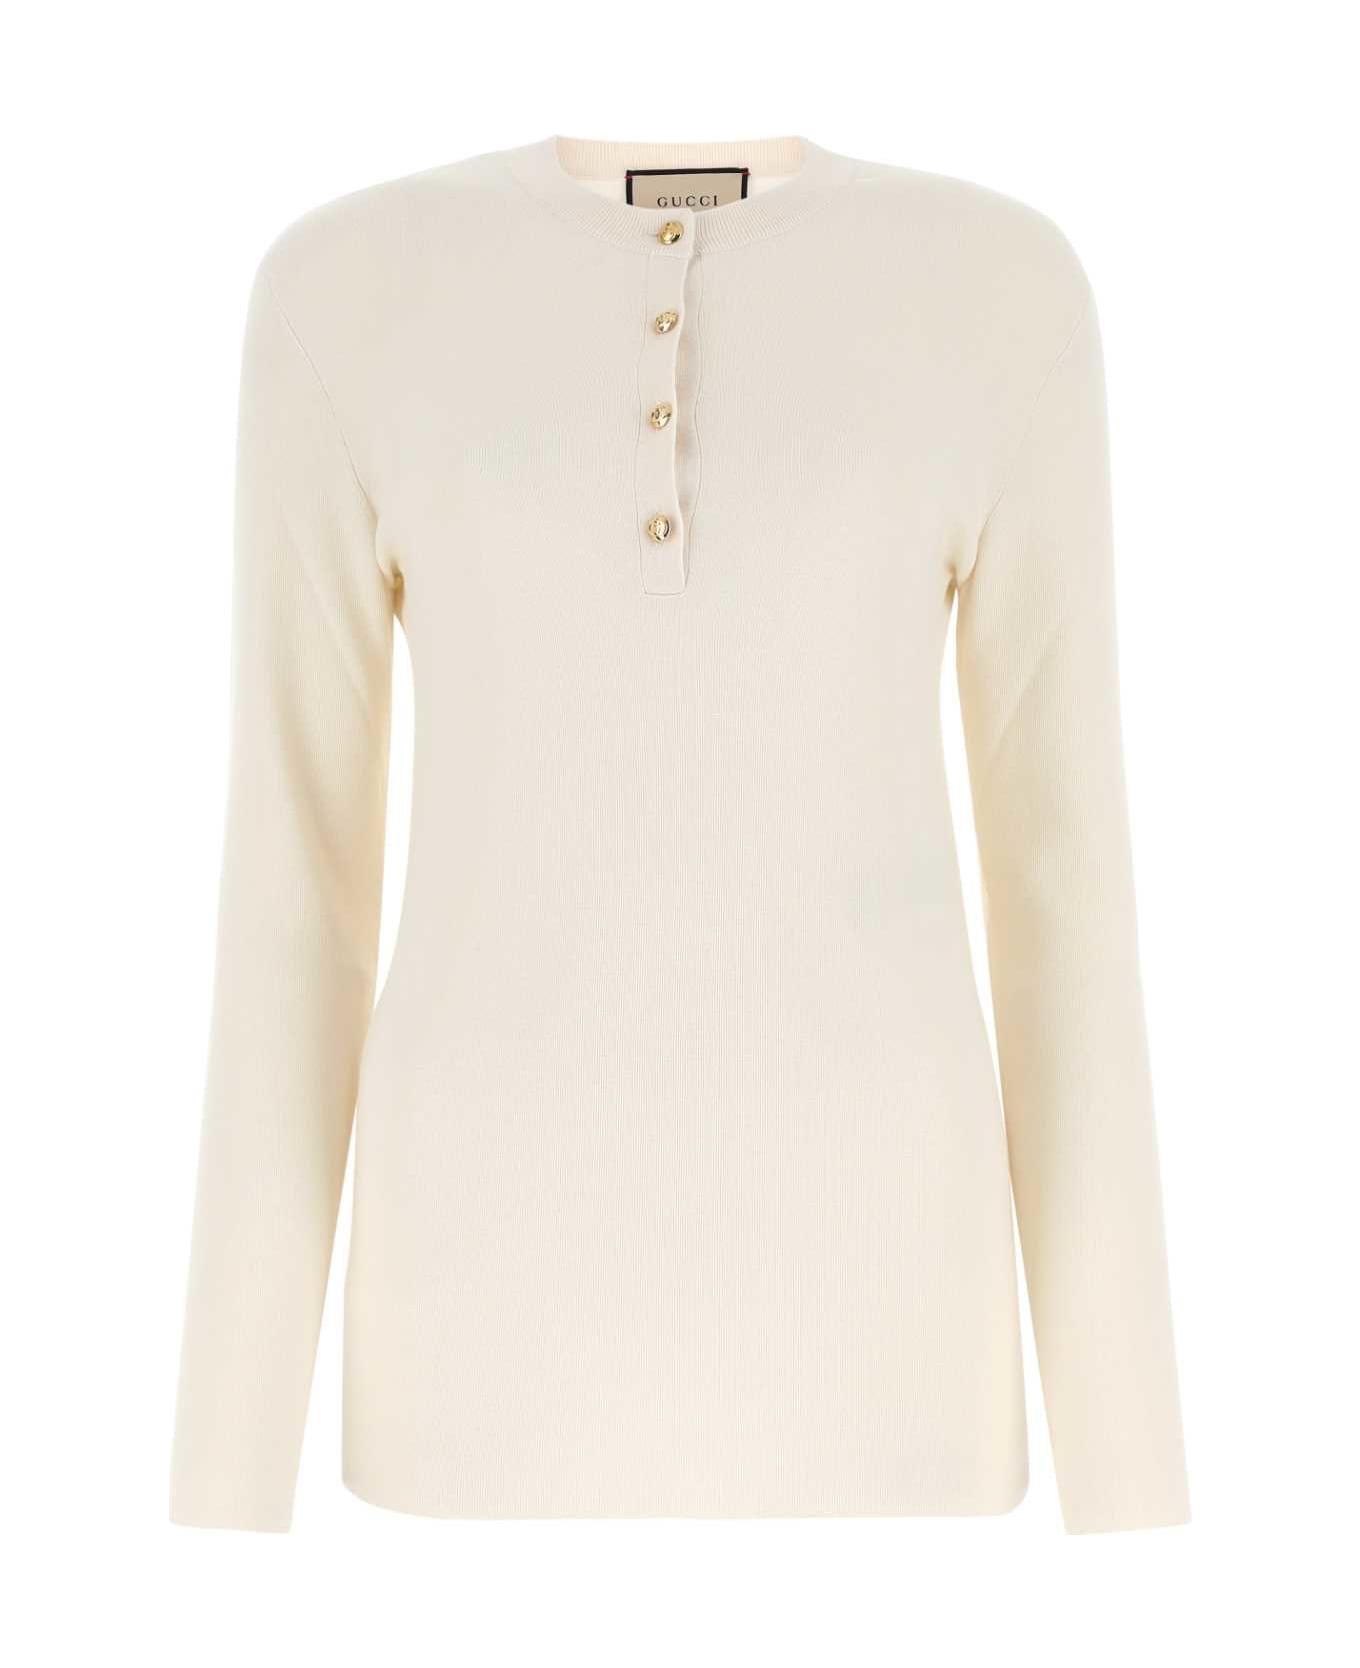 Gucci Ivory Cashmere Top - White フリース